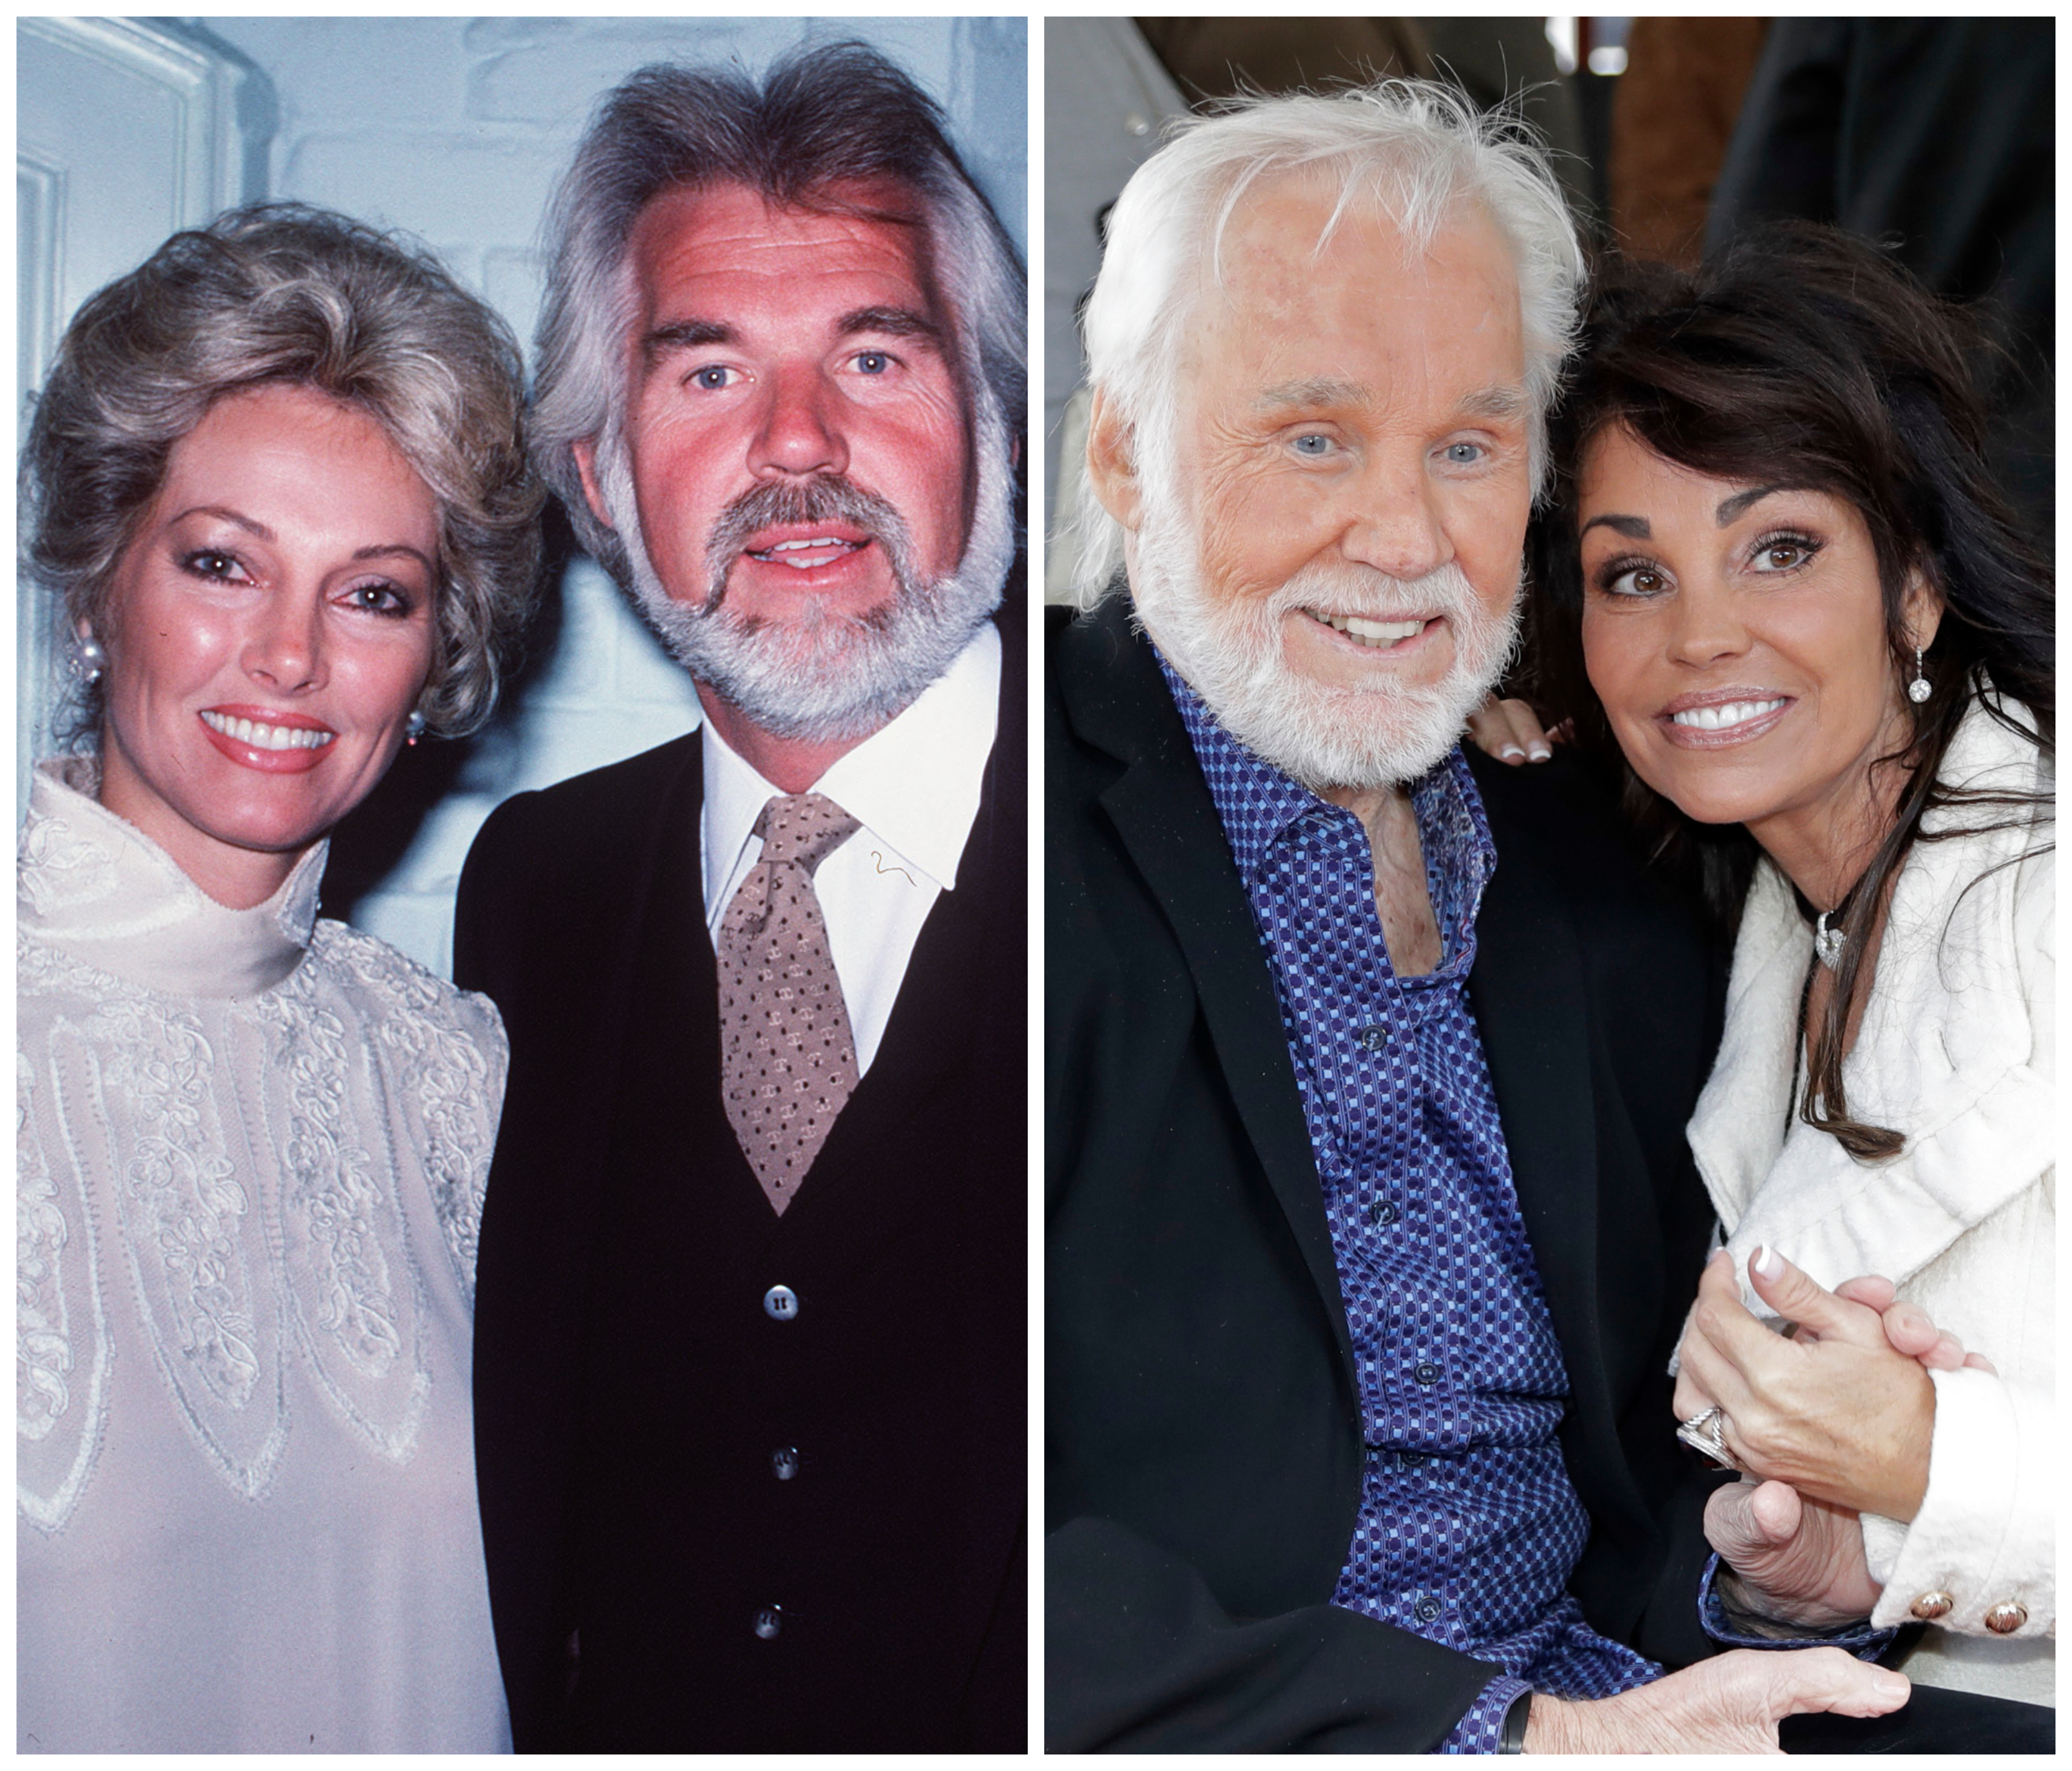 Kenny Rogers 5 Wives Wanda Miller, Marianne Gordon and More image